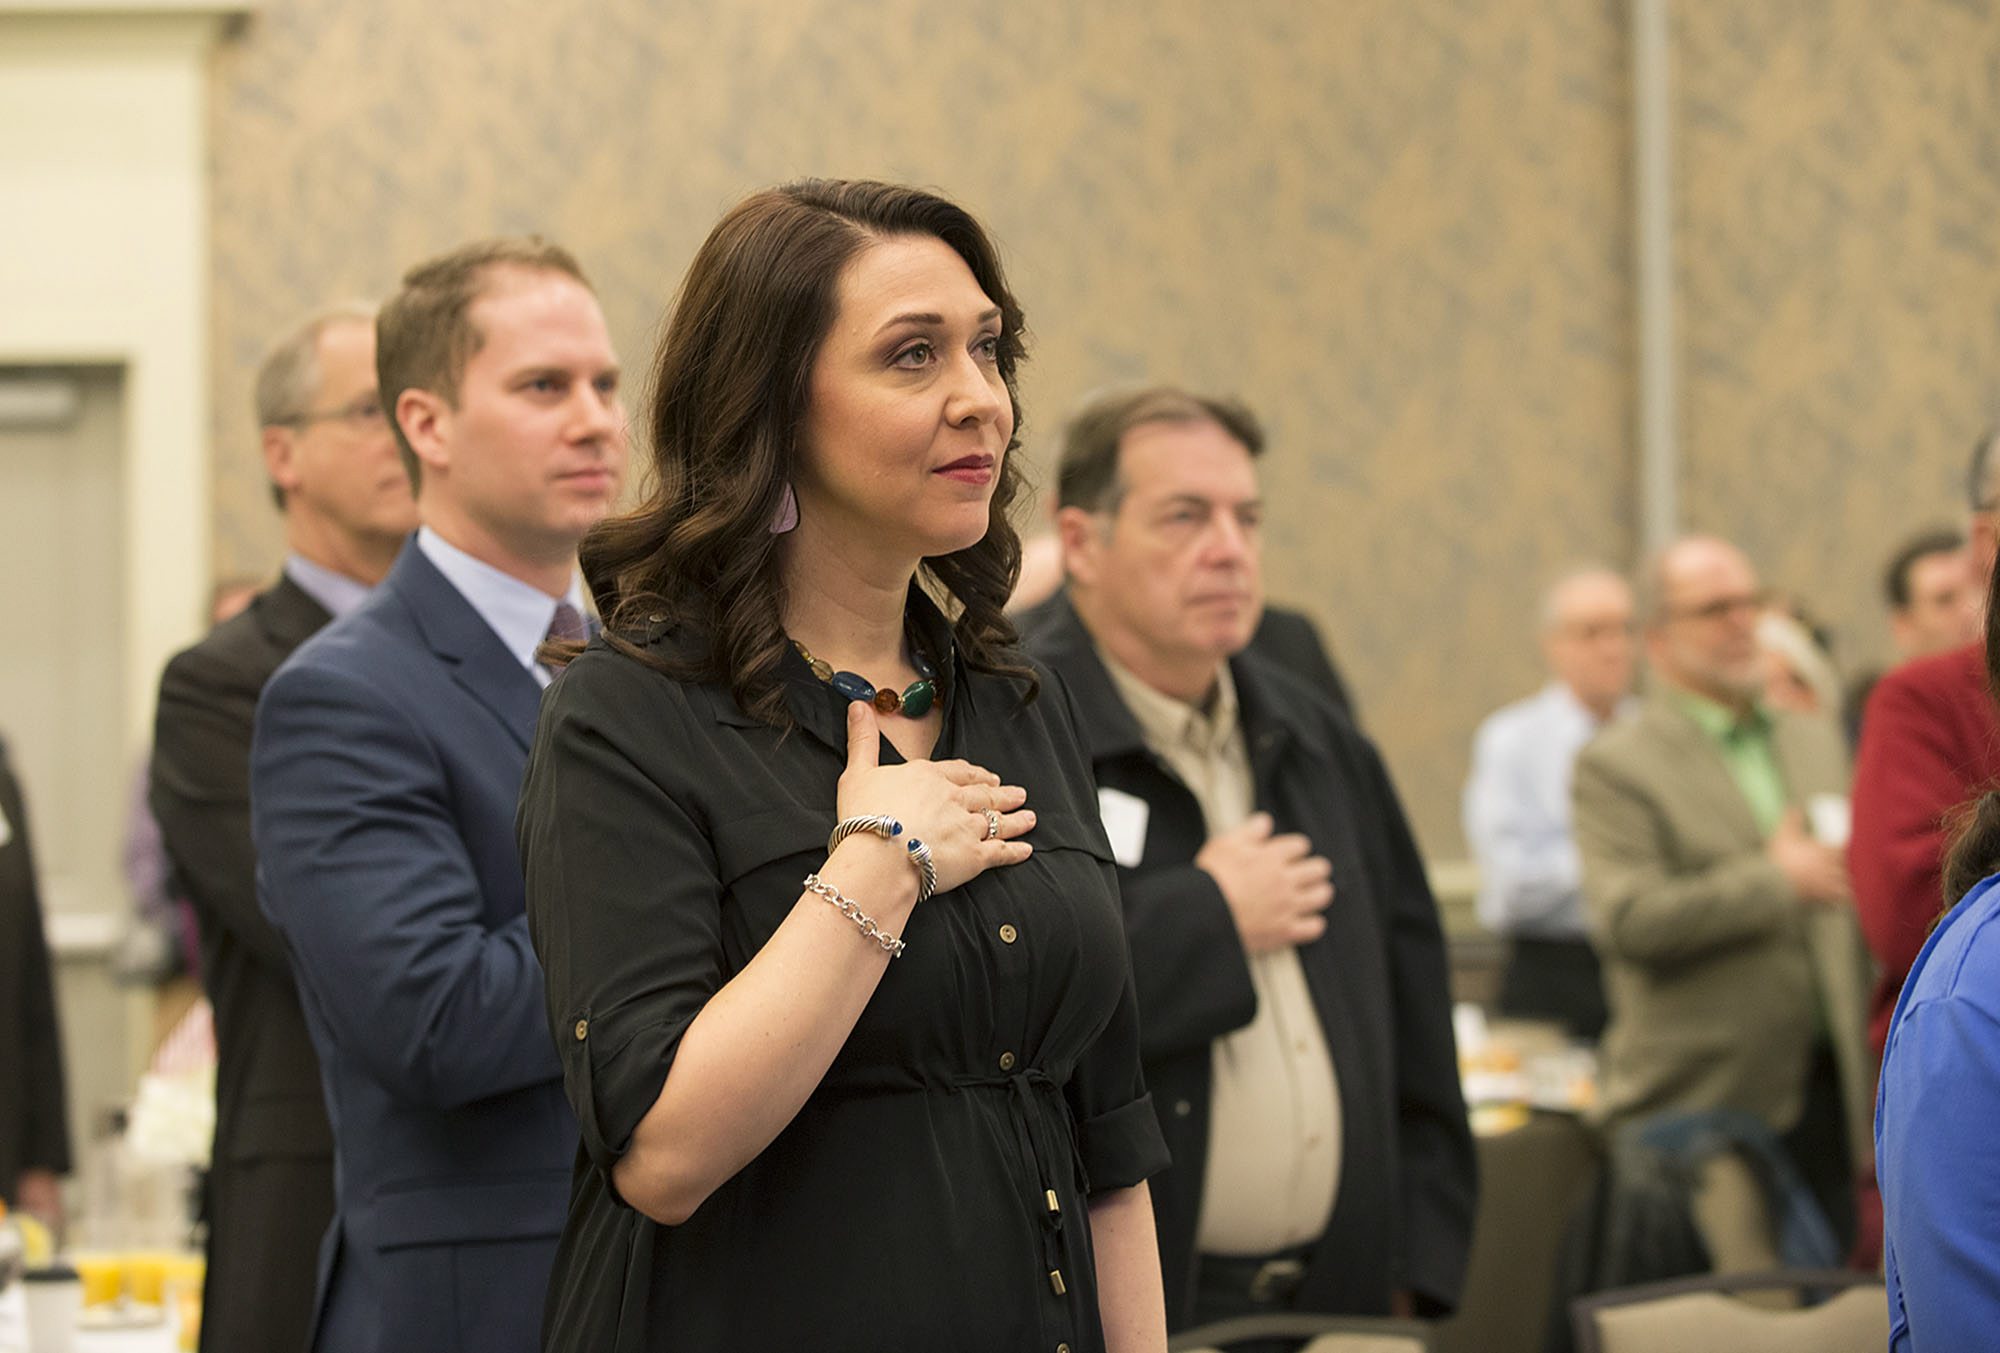 U.S. Rep. Jaime Herrera Beutler, R-Camas, hosted her campaign kickoff event at the Hilton Vancouver Washington on Friday morning. Herrera Beutler is currently serving her third term in Congress.